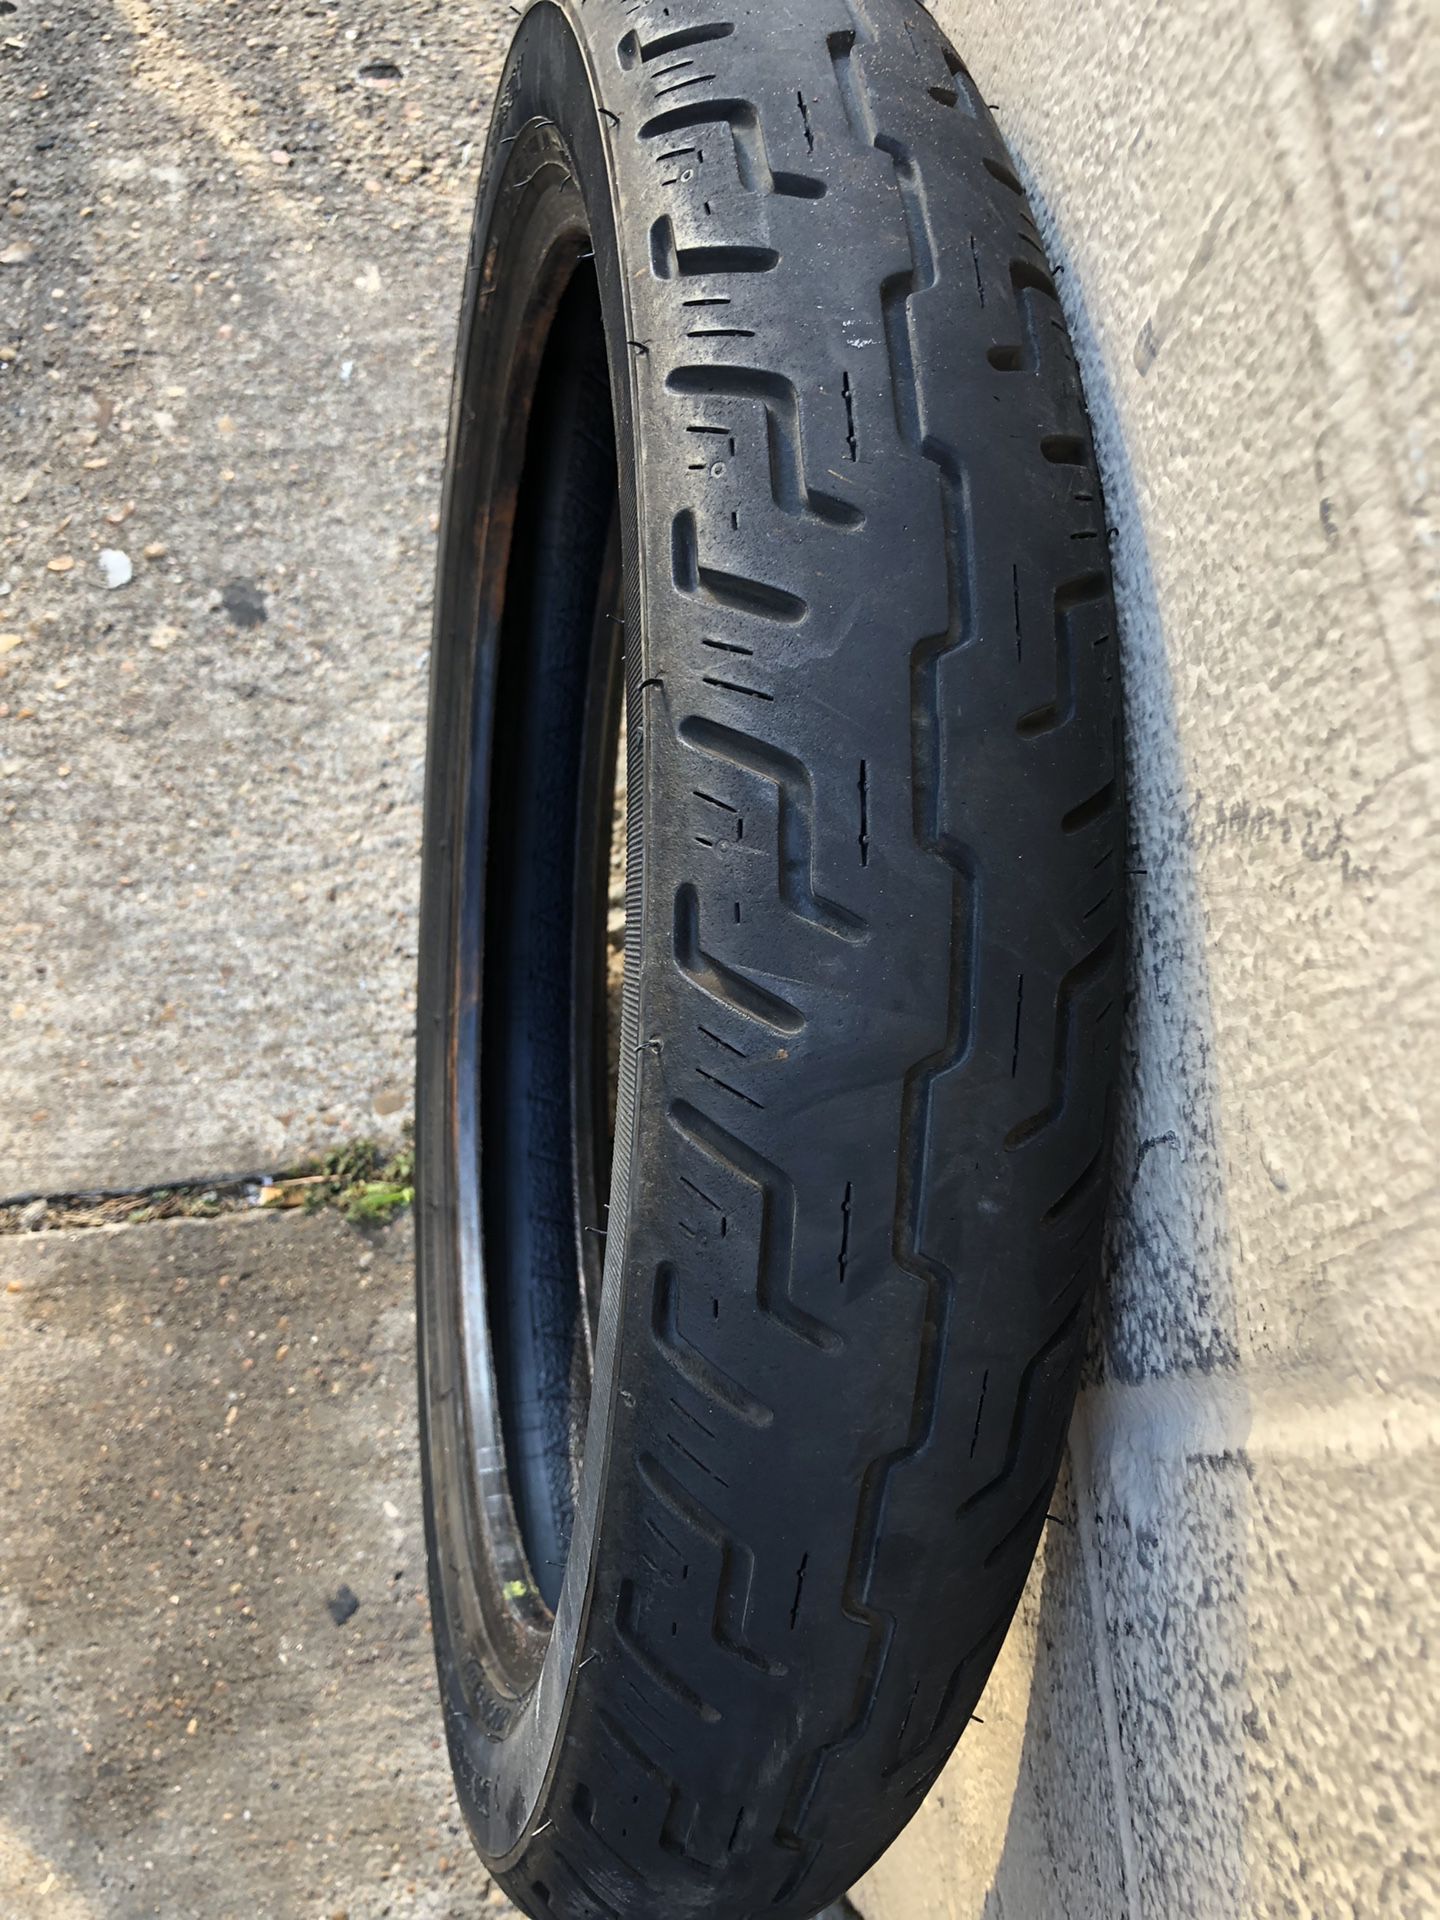 100/90/19 Dunlop front Motorcycle tire